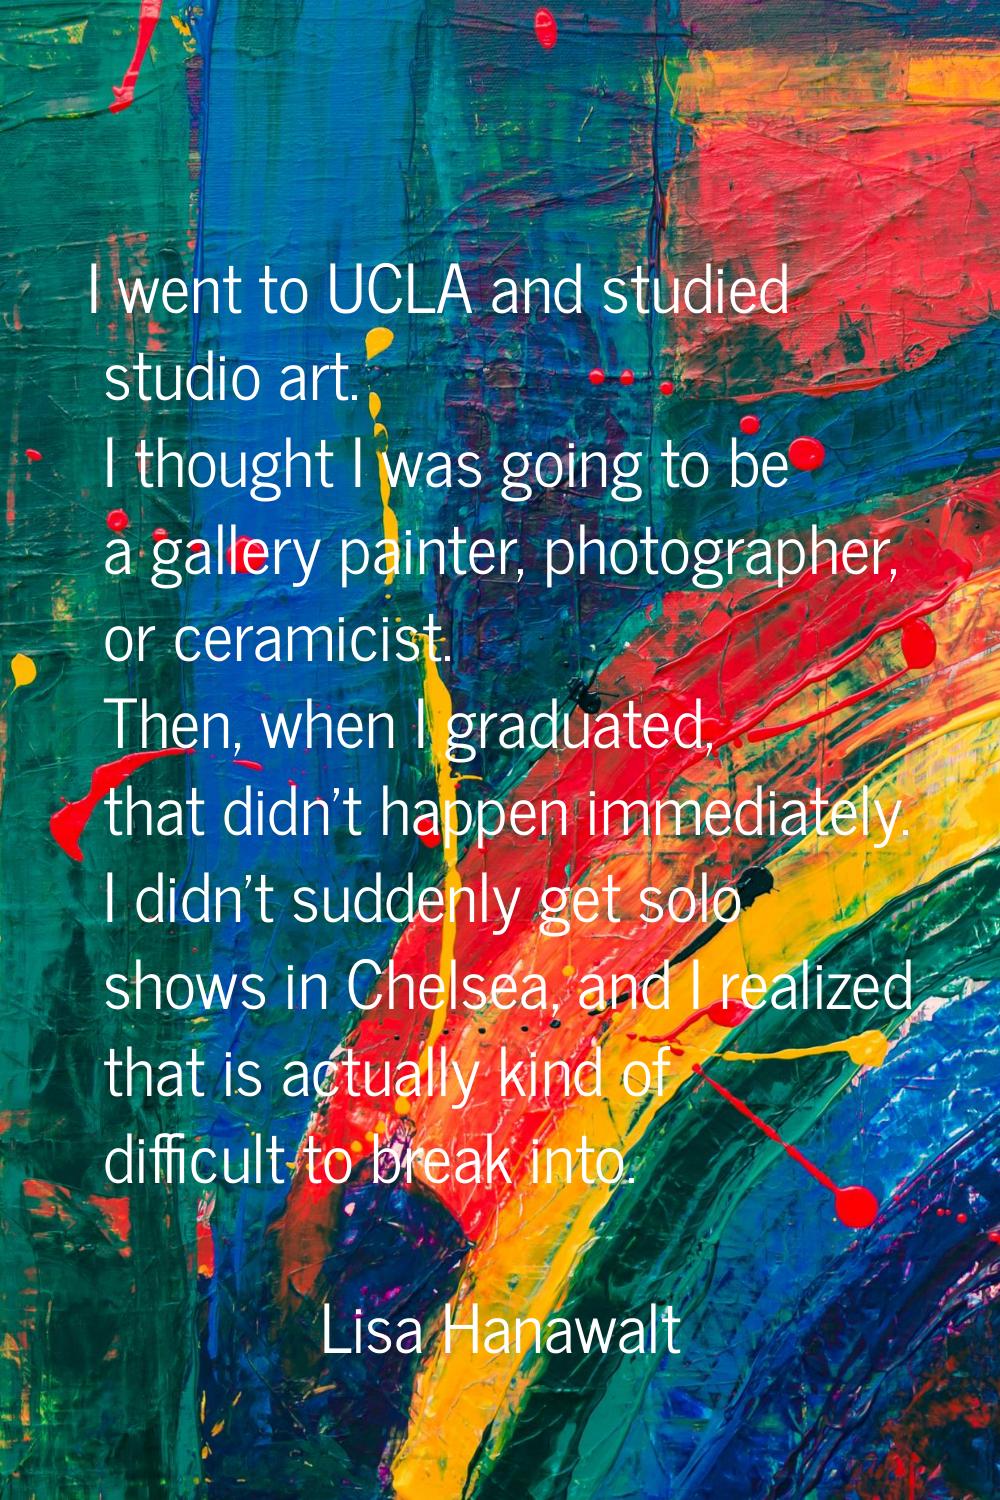 I went to UCLA and studied studio art. I thought I was going to be a gallery painter, photographer,